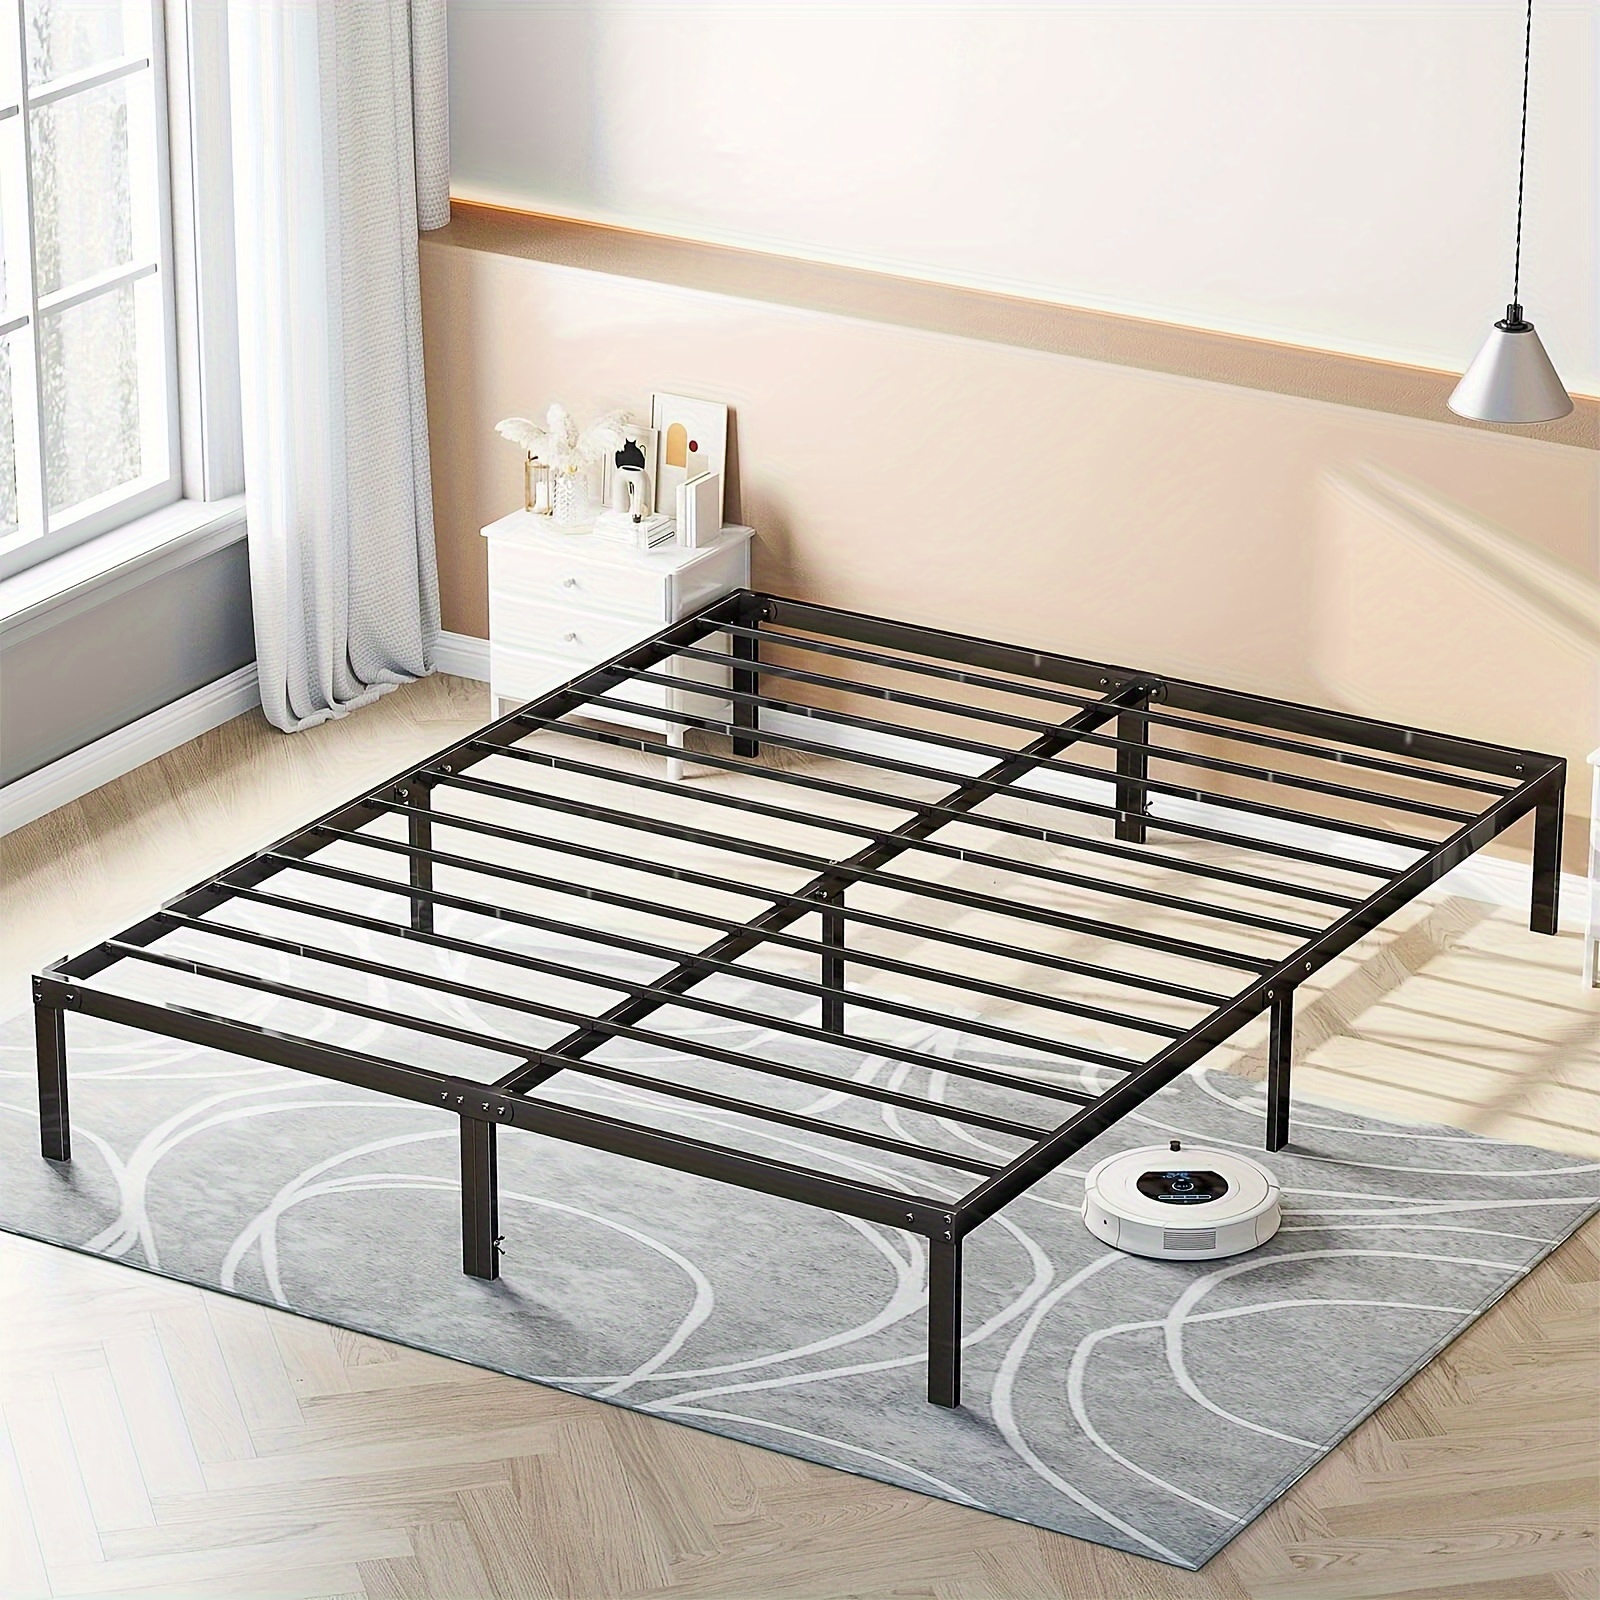 

Queen Bed Frame - Heavy Duty Metal Platform Bed Frames Queen Size With Storage Space Under Frame, 14inches, Sturdy Steel Slat Support, No Box Spring Needed